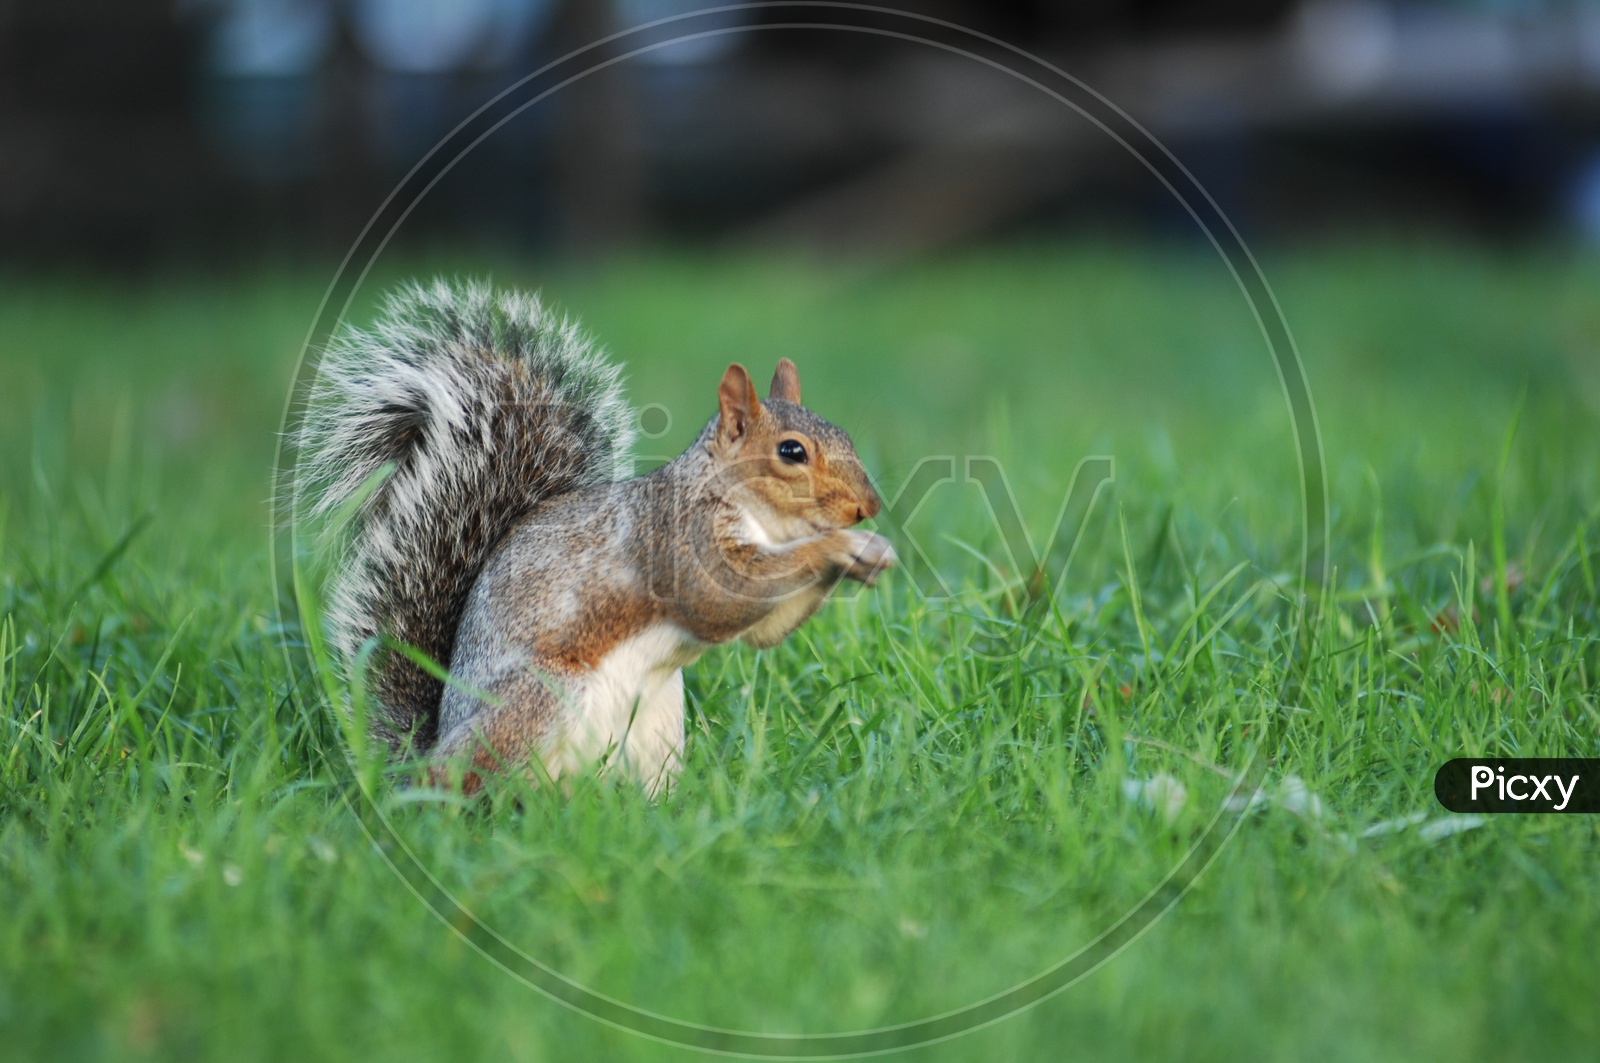 A Squirrel on the grass eating nut